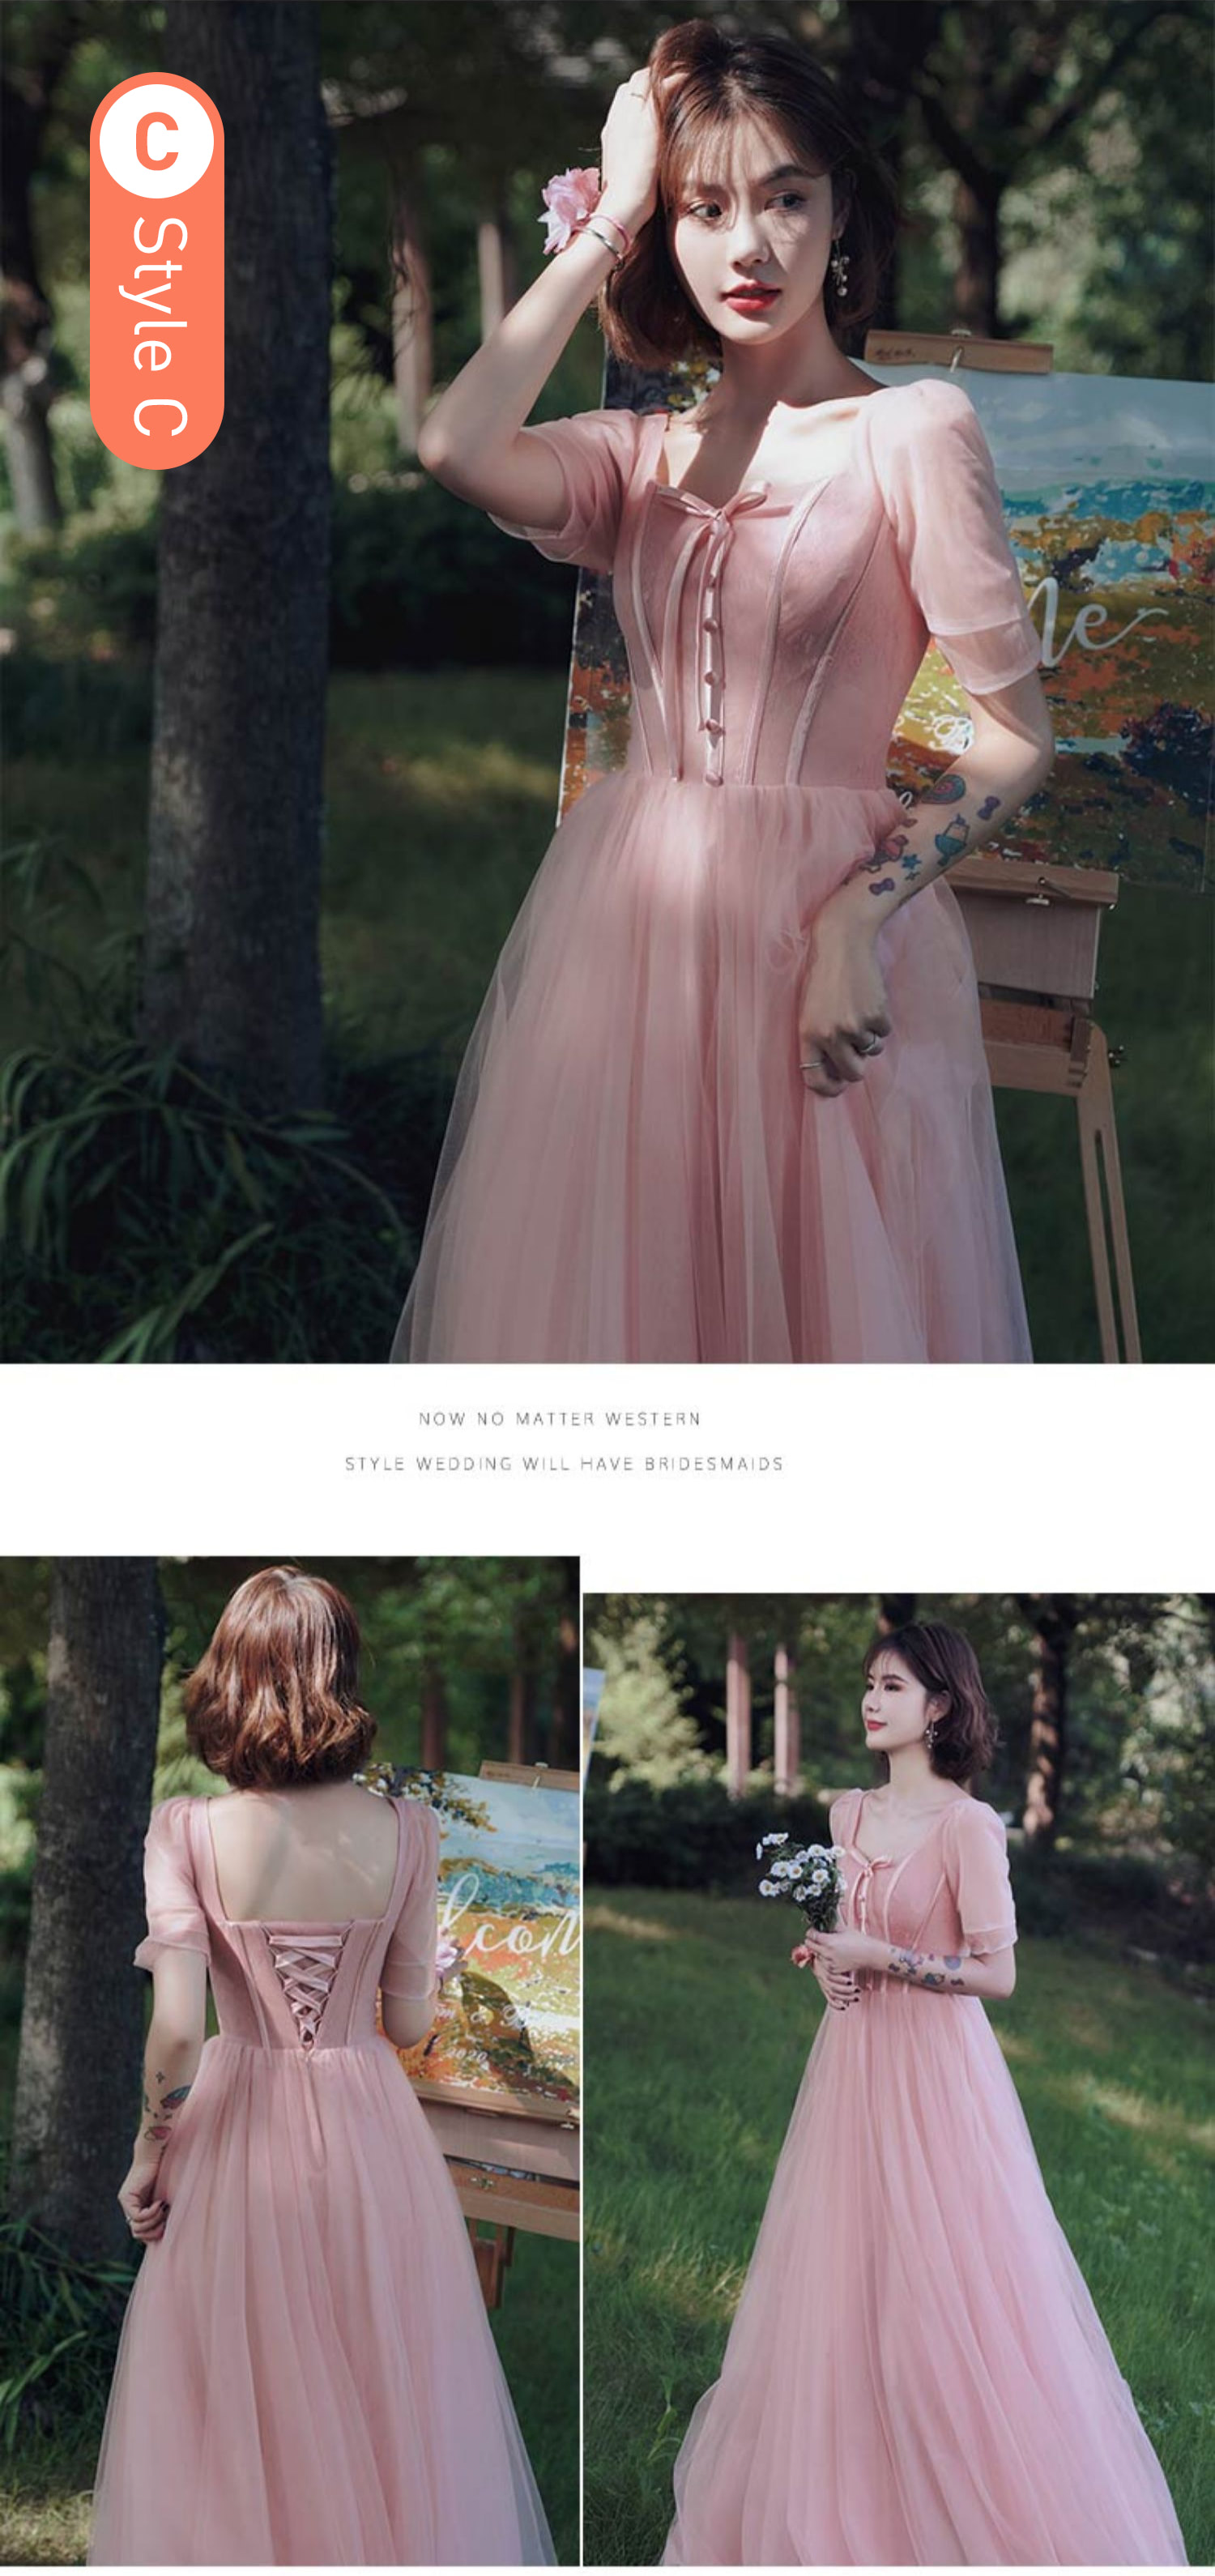 Feminine-Sweet-Pink-Tulle-Bridesmaid-Dress-Prom-Party-Ball-Gown19